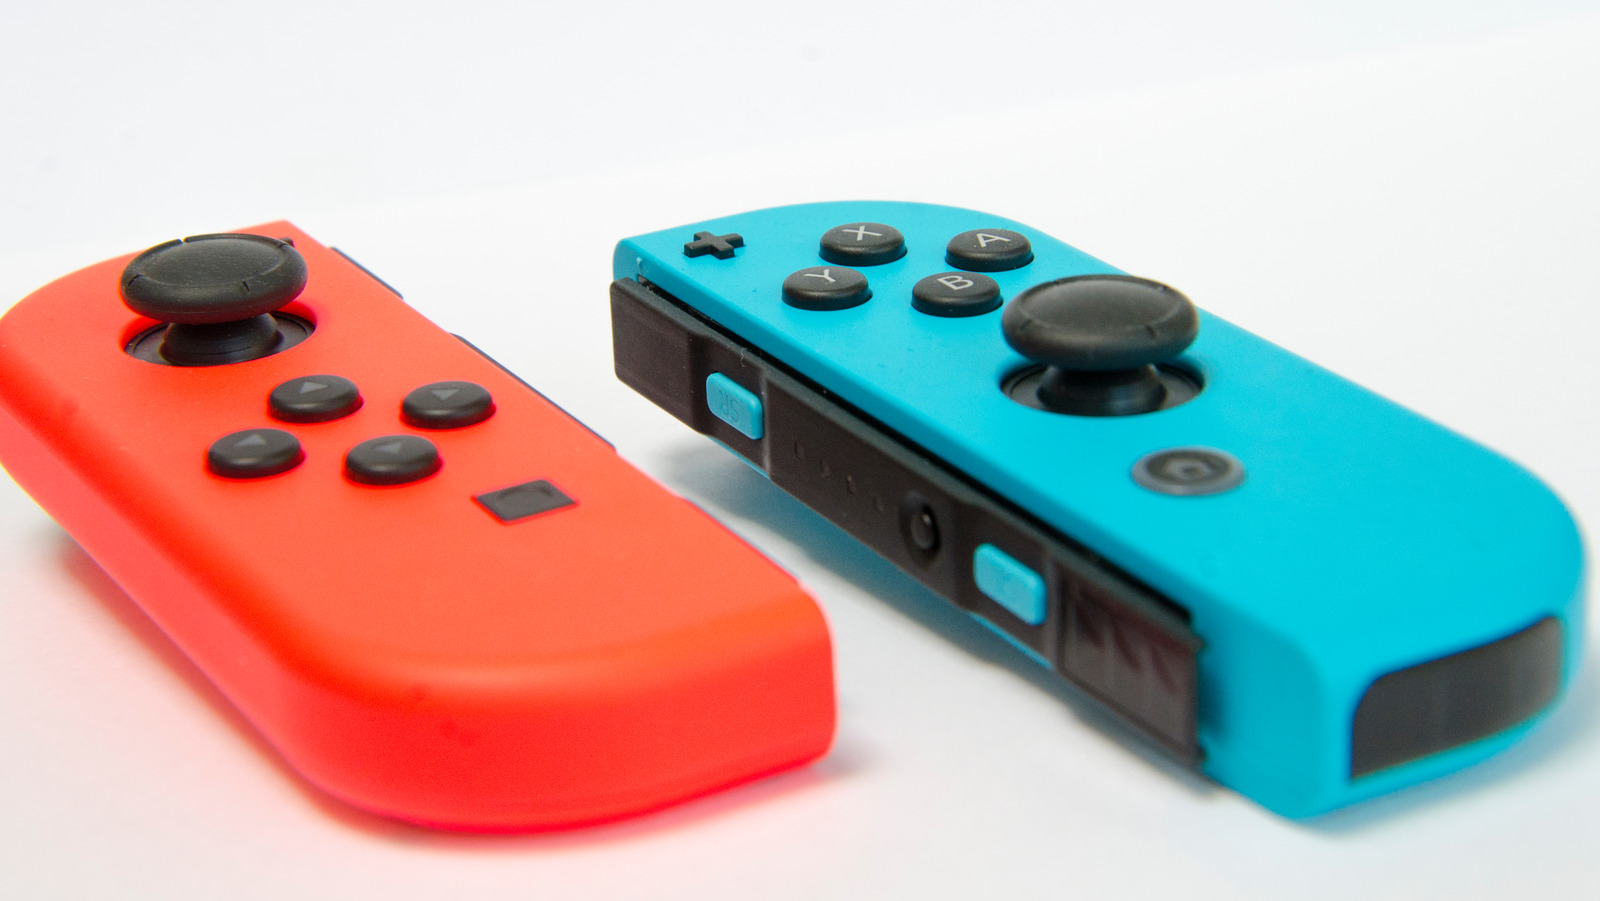 The Nintendo Switch Joy-Con showed us we deserve more from